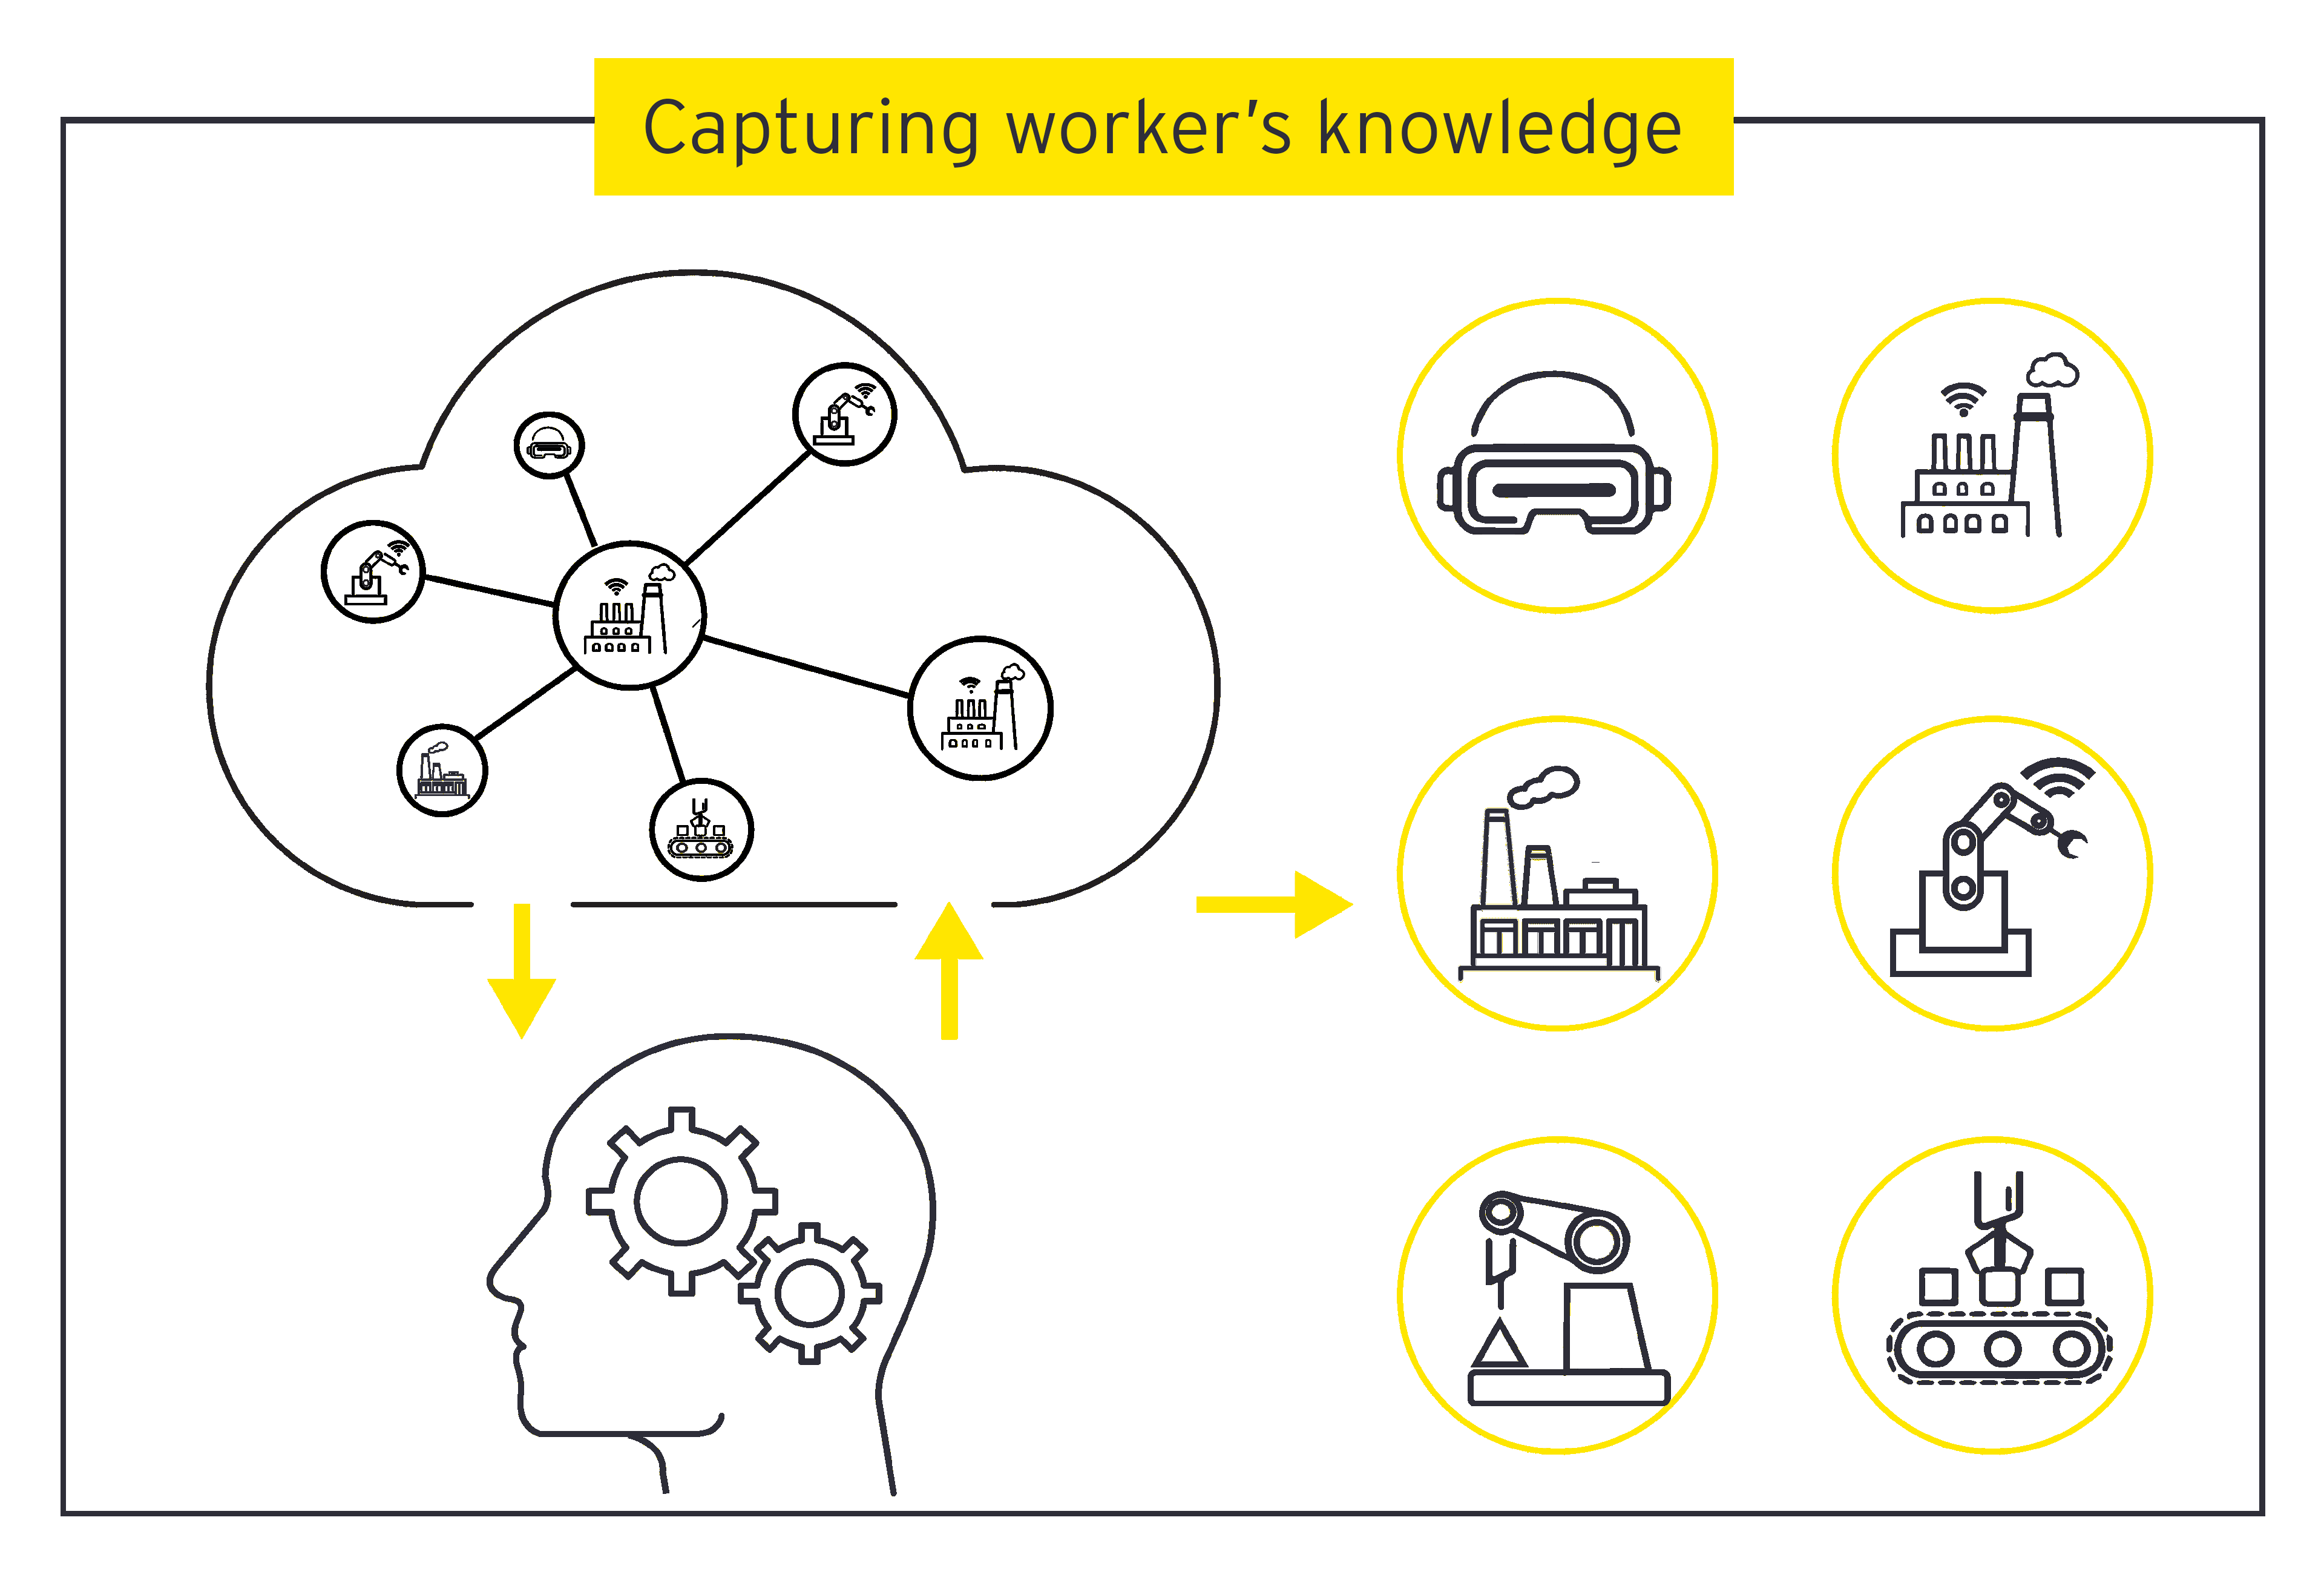 Figure 1. Capturing workers’ knowledge